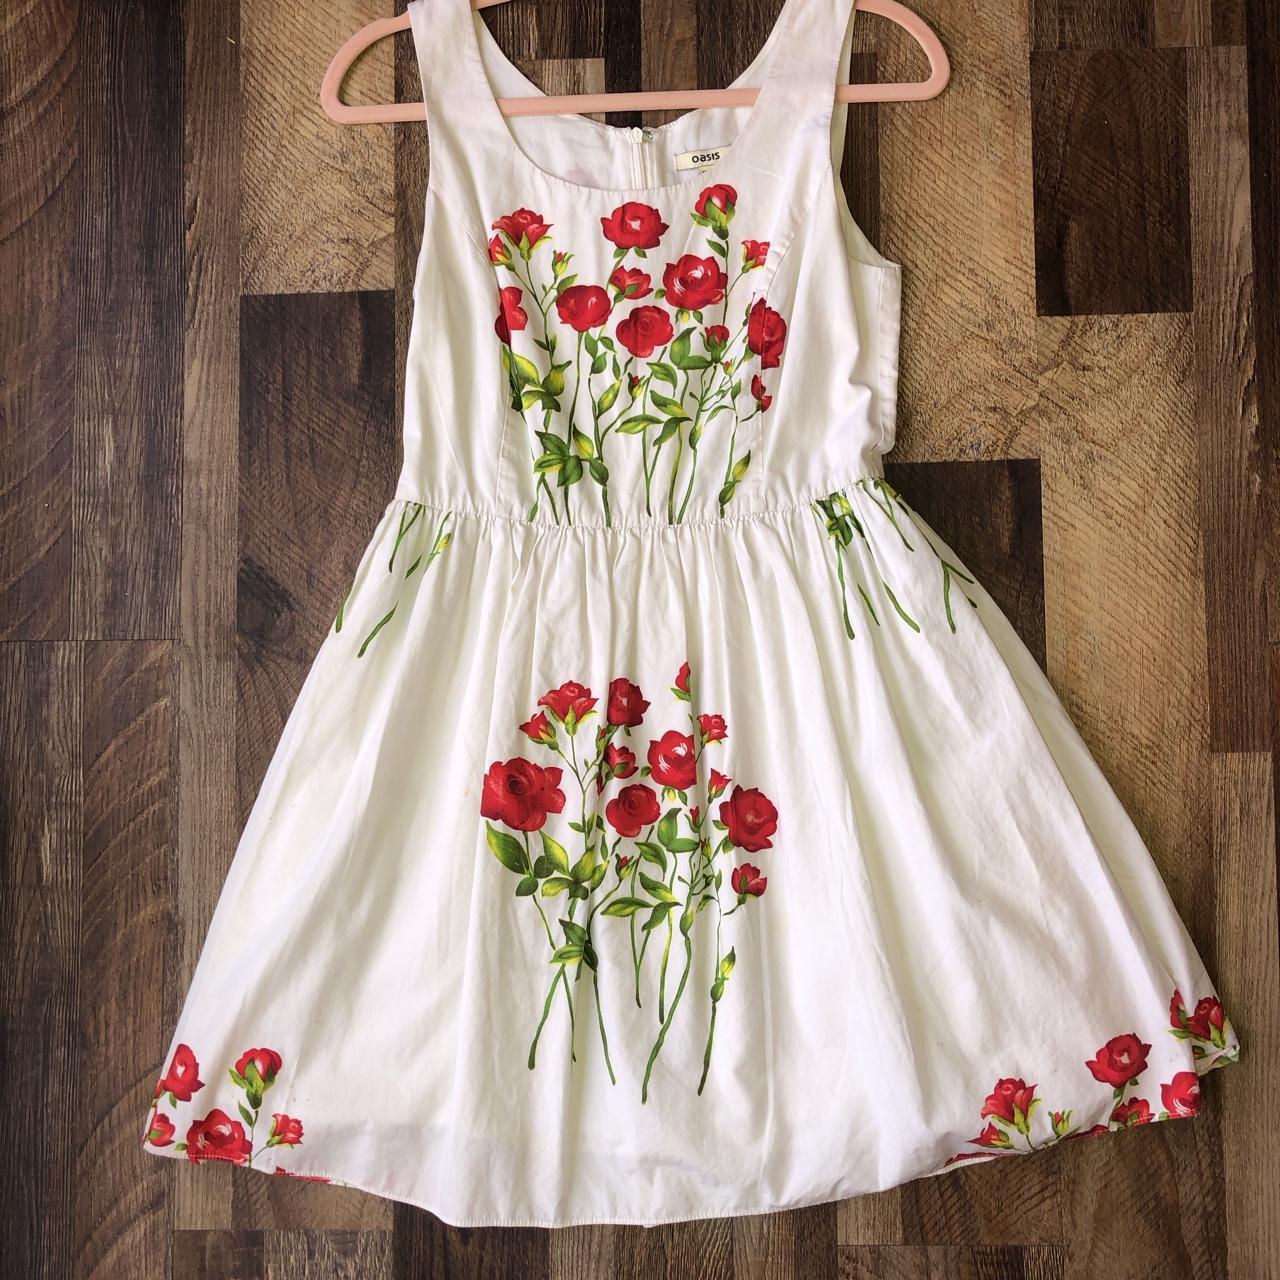 Oasis Women's White and Red Dress